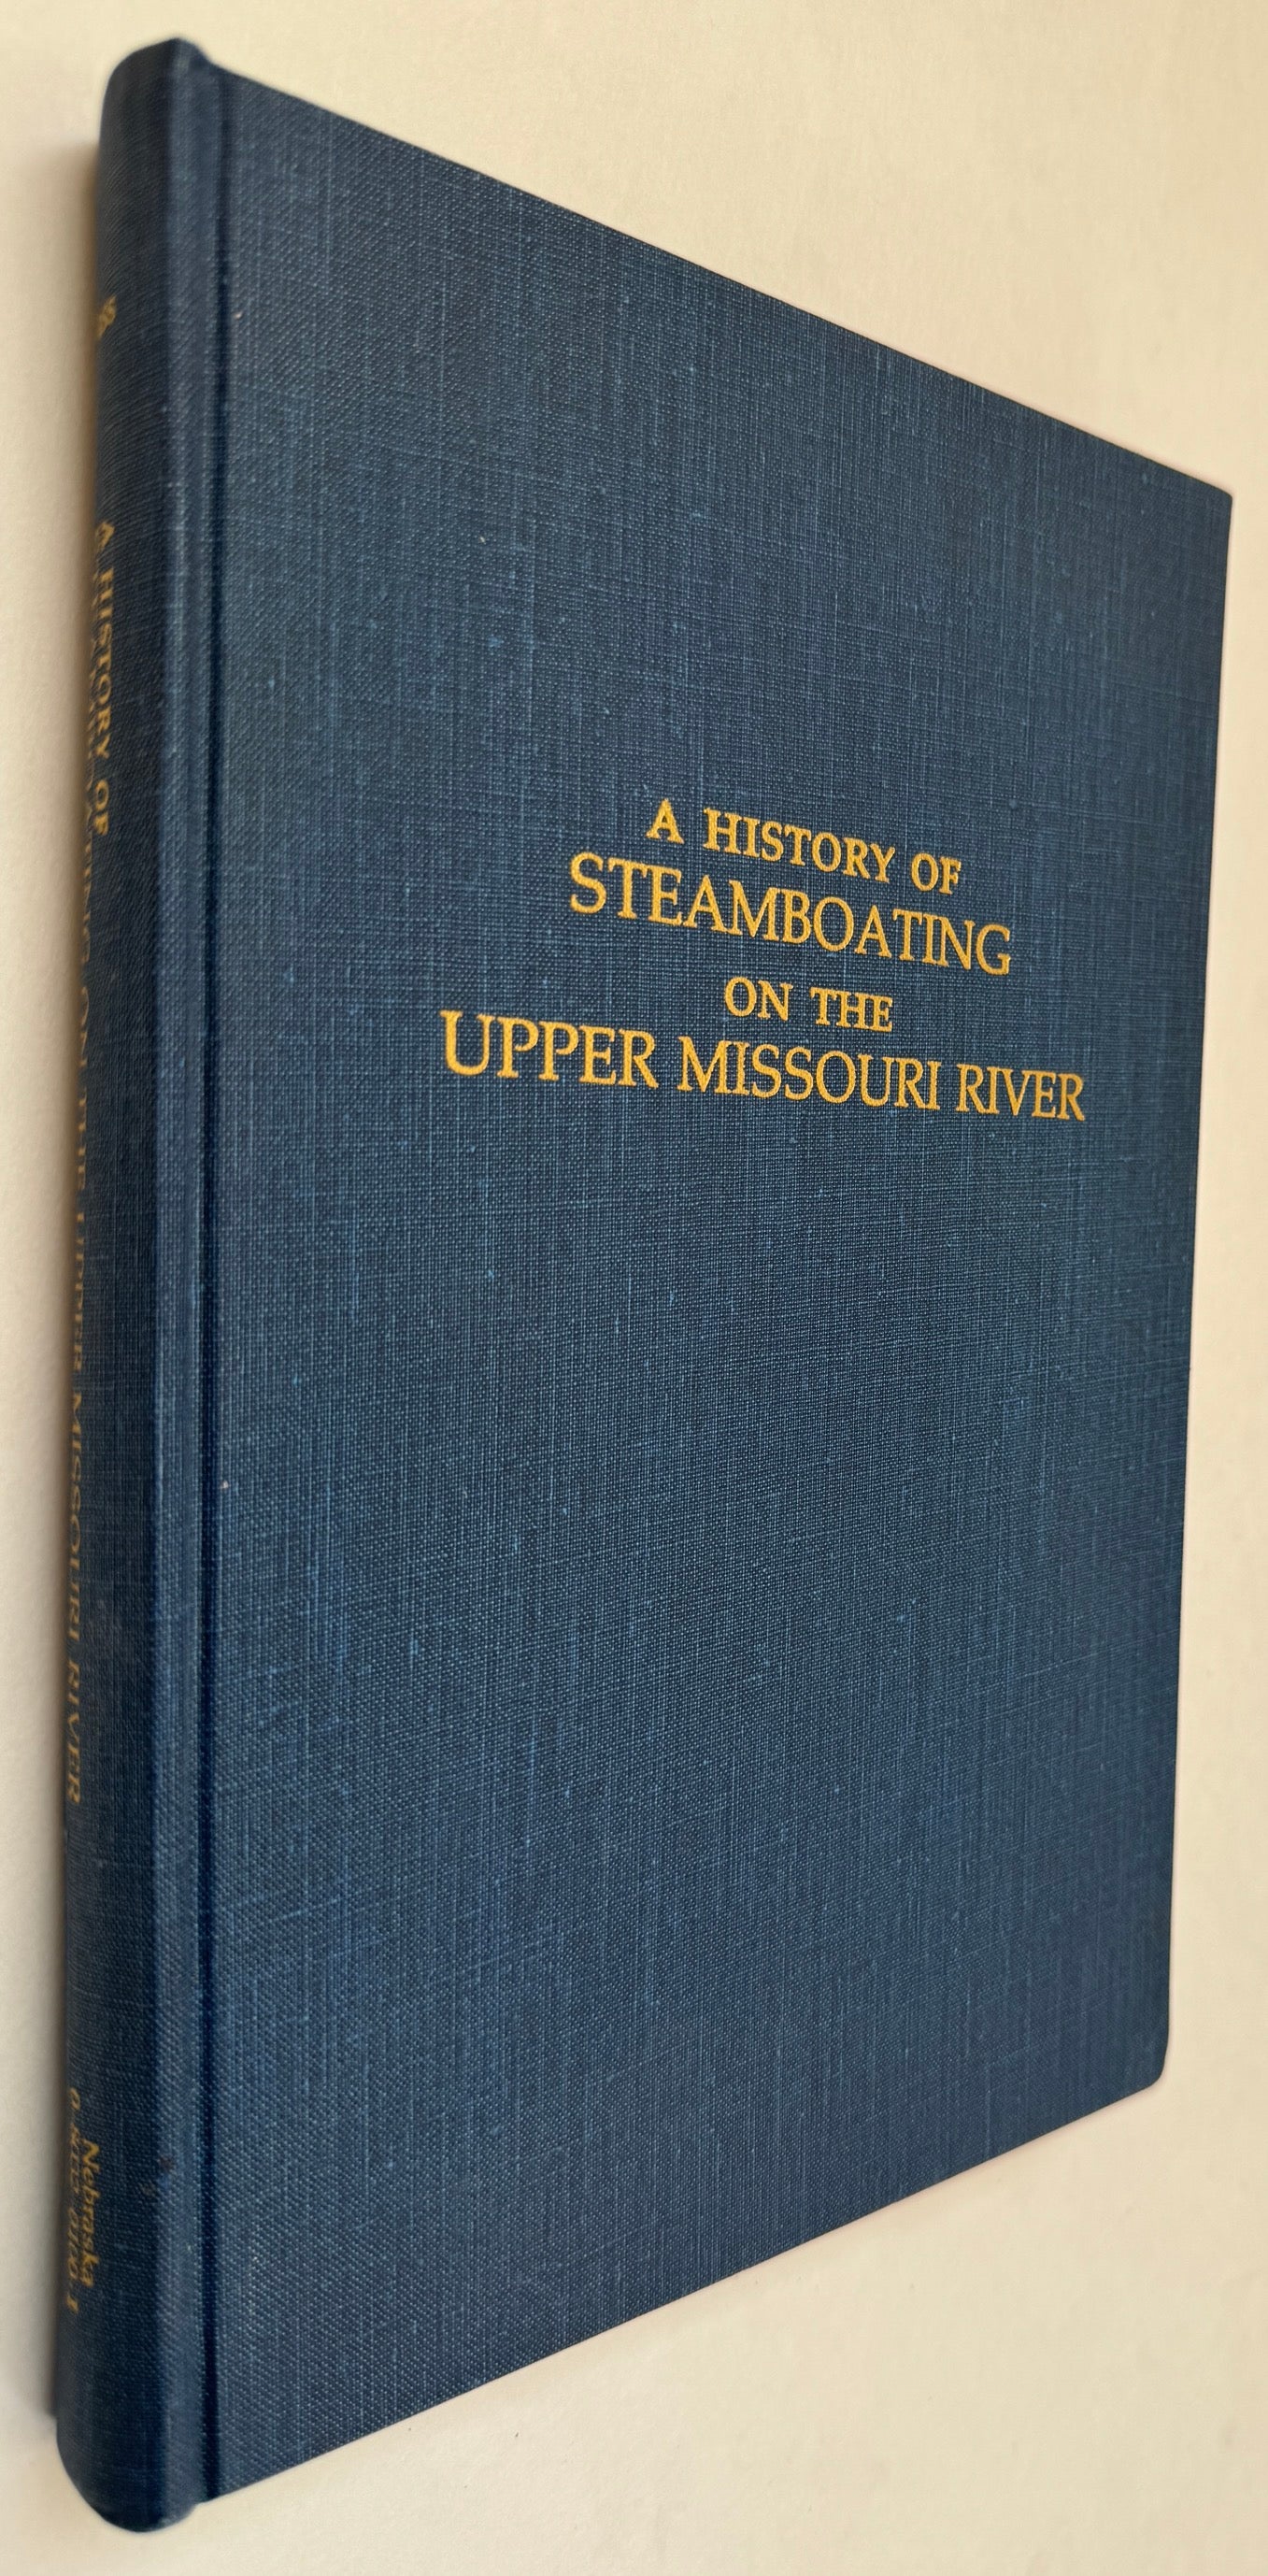 A History of Steamboating on the Upper Missouri River